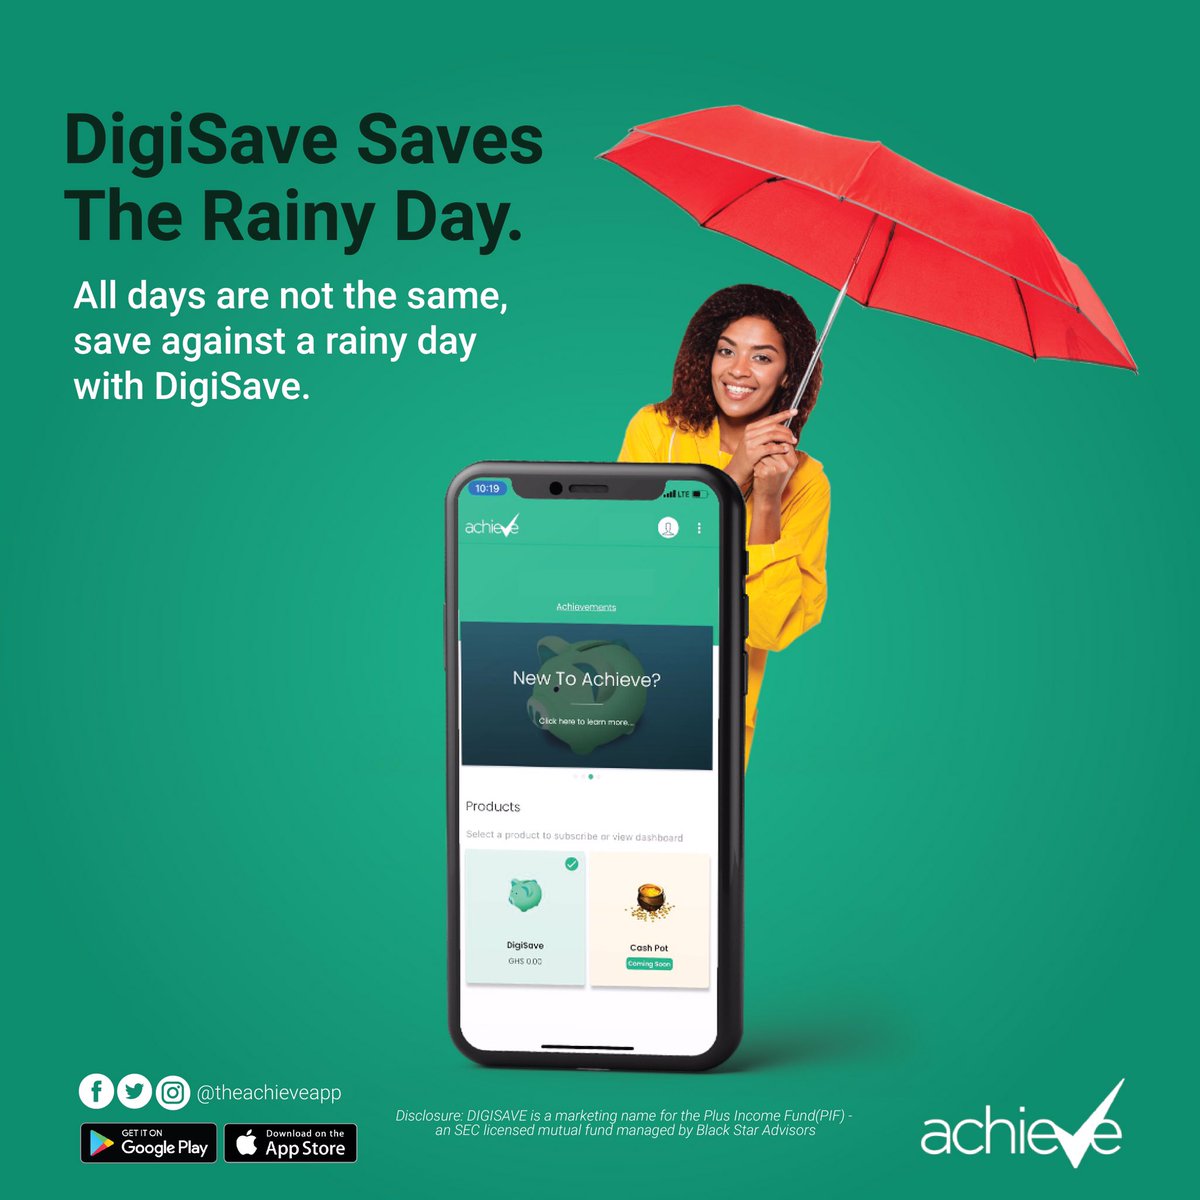 All days are not the same, save against a 'rainy day' with DigiSave on the Achieve App. #investingapp #achieveapp #digisave